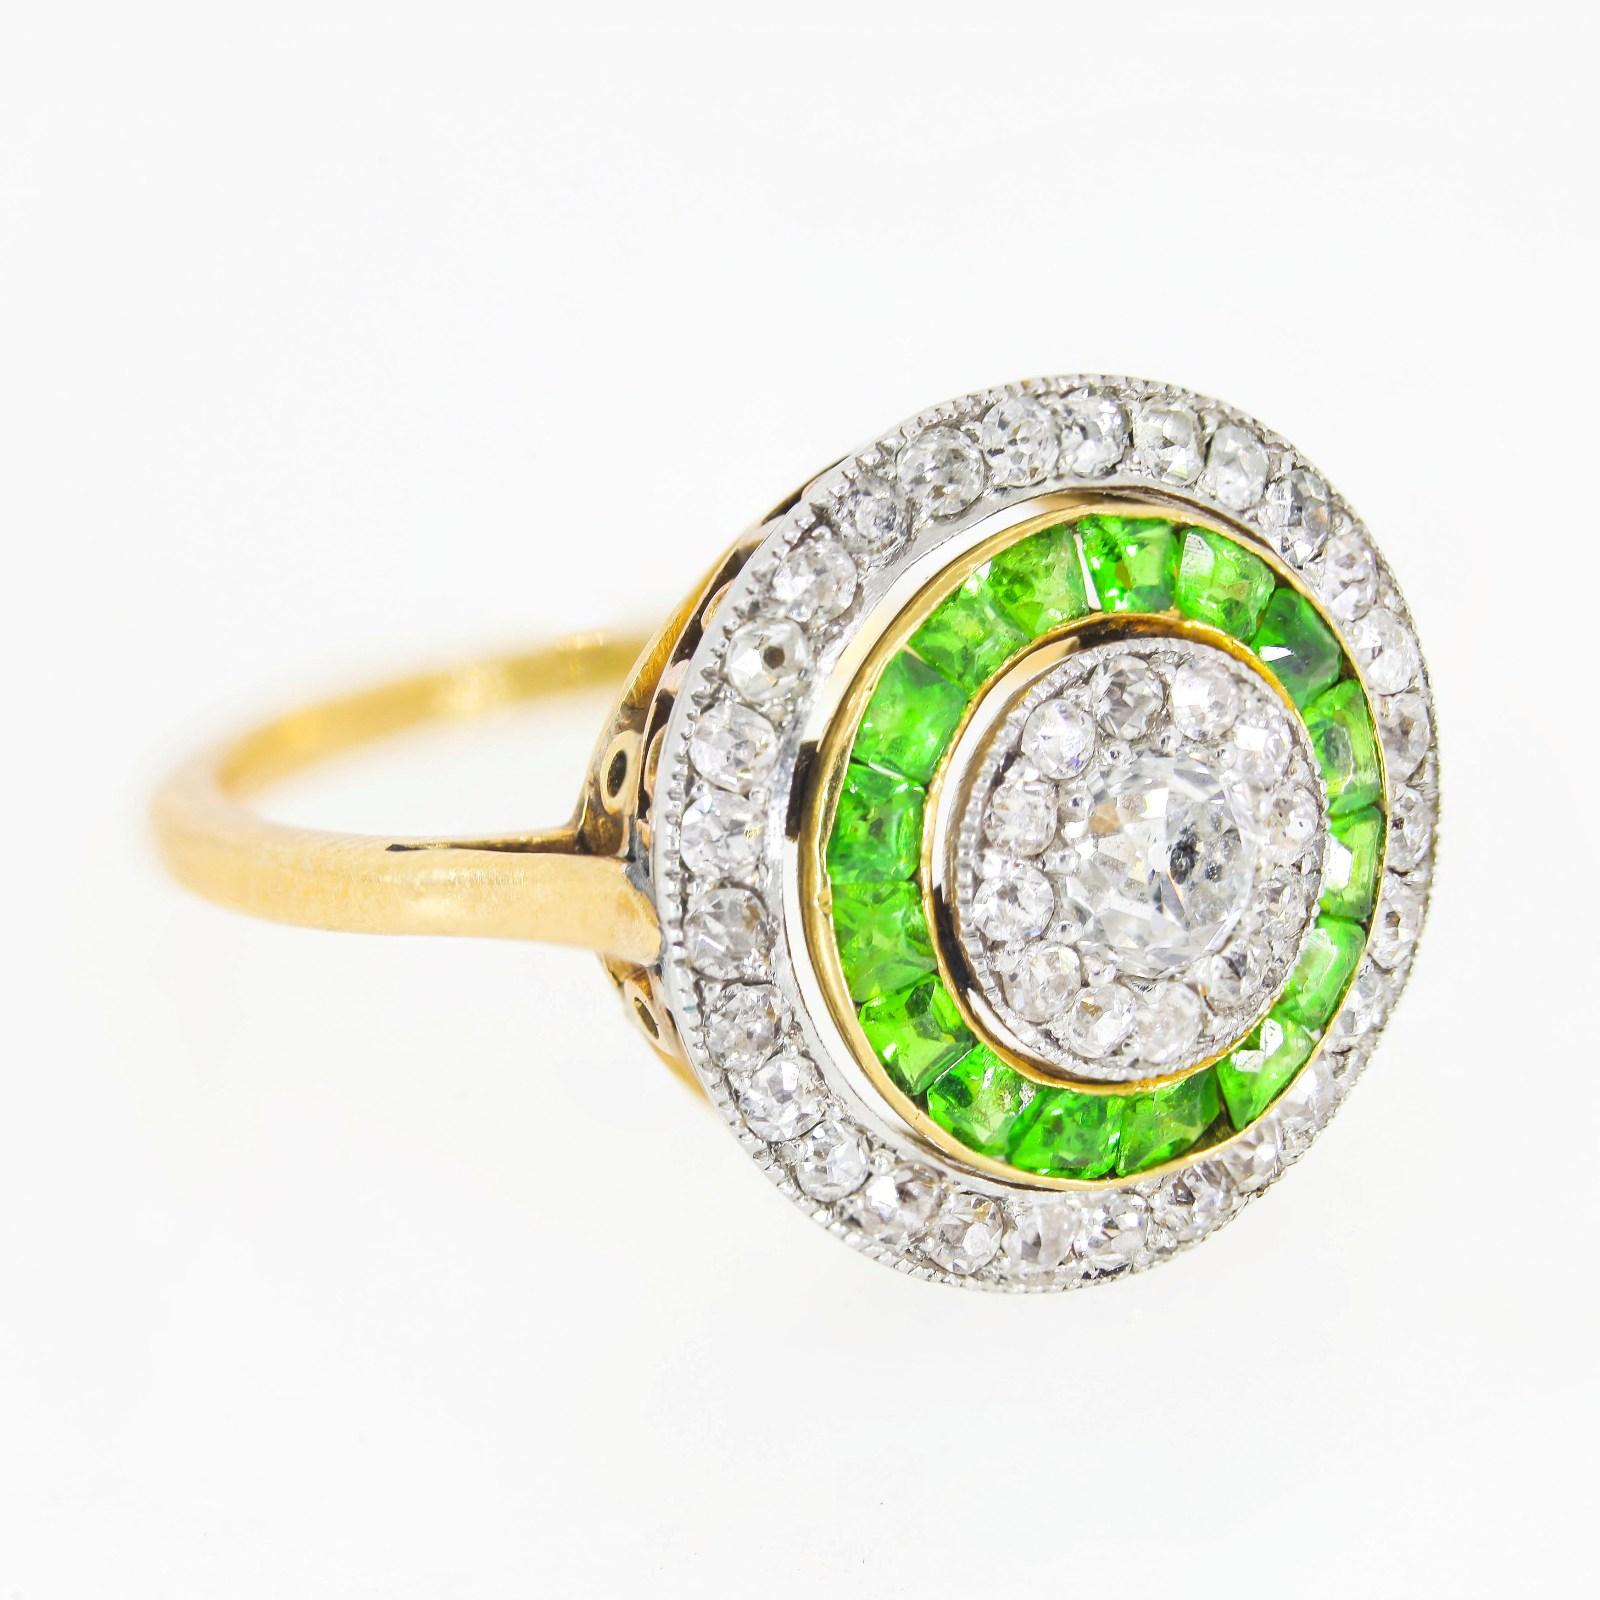 Created by hand of platinum topped 18KT yellow gold, this 1910-1920  Edwardian ring is one-of-a-kind stunner.  The Old Mine cut diamond at the center weighs 0.35 carat, surrounded by concentric rings of calibre bright Demantoid Garnerts and forty